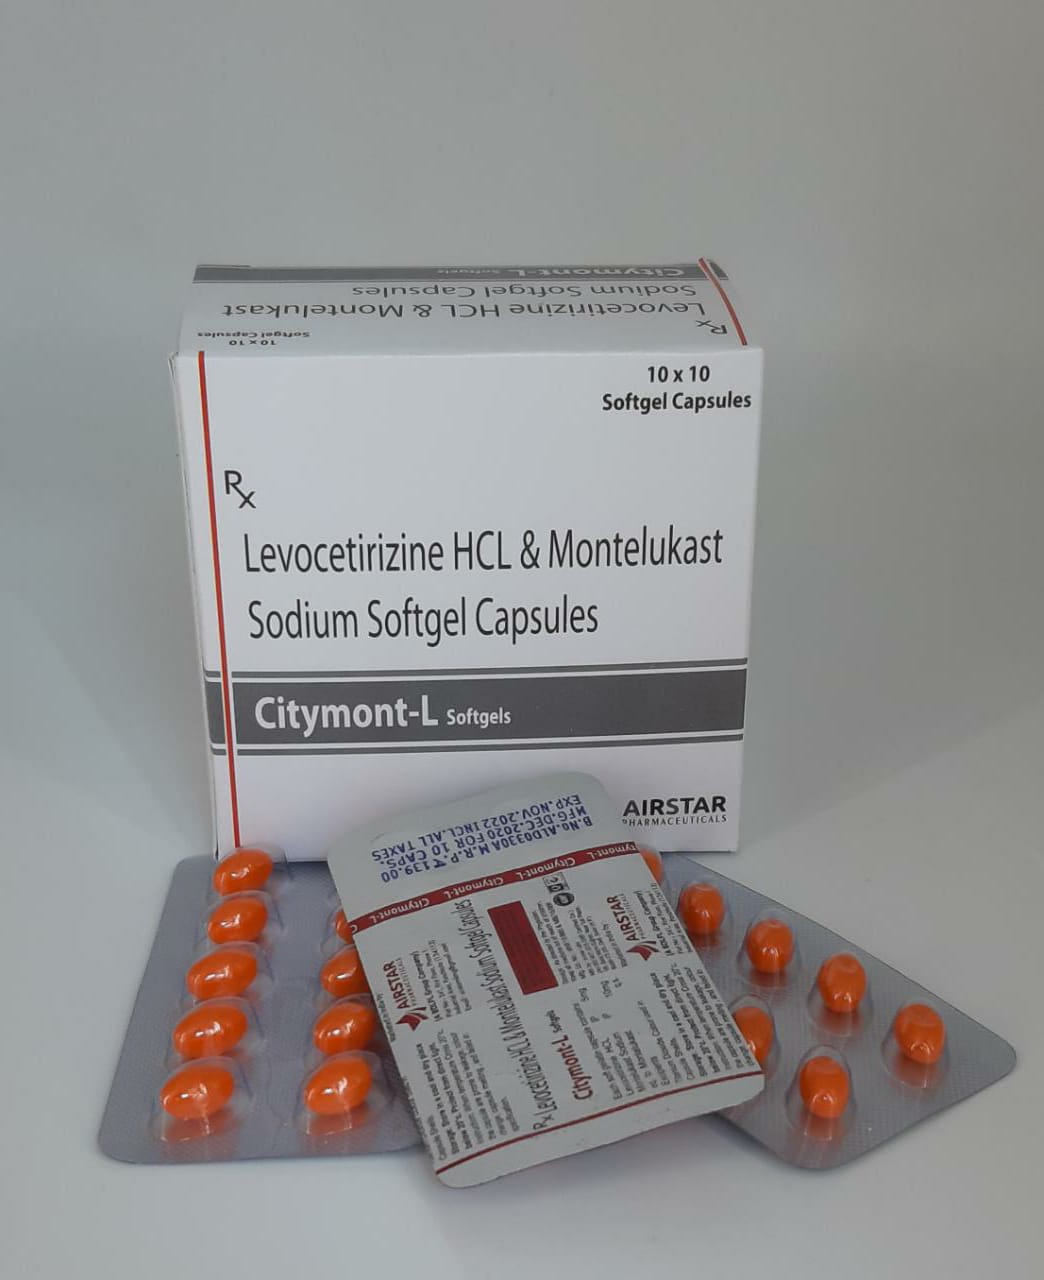 Product Name: Citymont L, Compositions of are Levocetrizine HCL & Montelukast Sodium Softgel Capsules - Biodiscovery Lifesciences Pvt Ltd